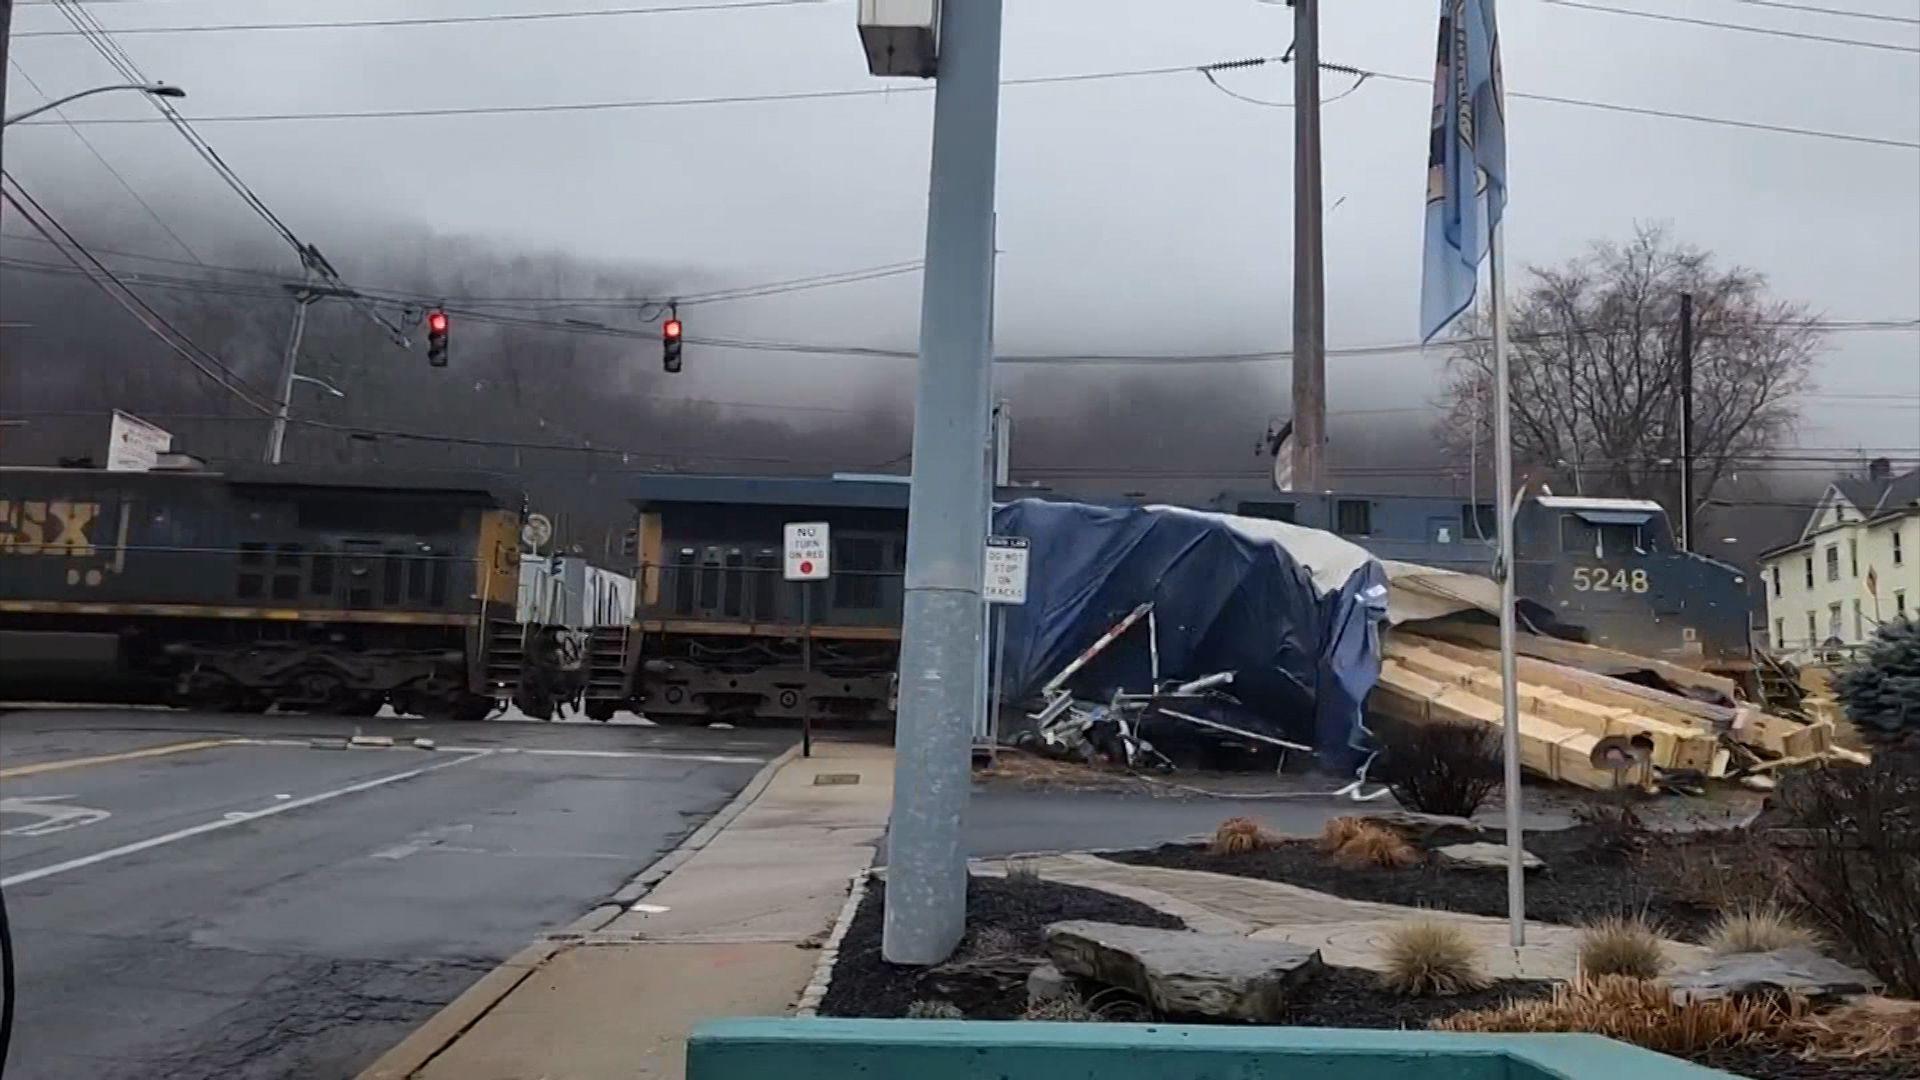 Train Cars Being Moved At Choo Choo As Part Of Over $10 Million